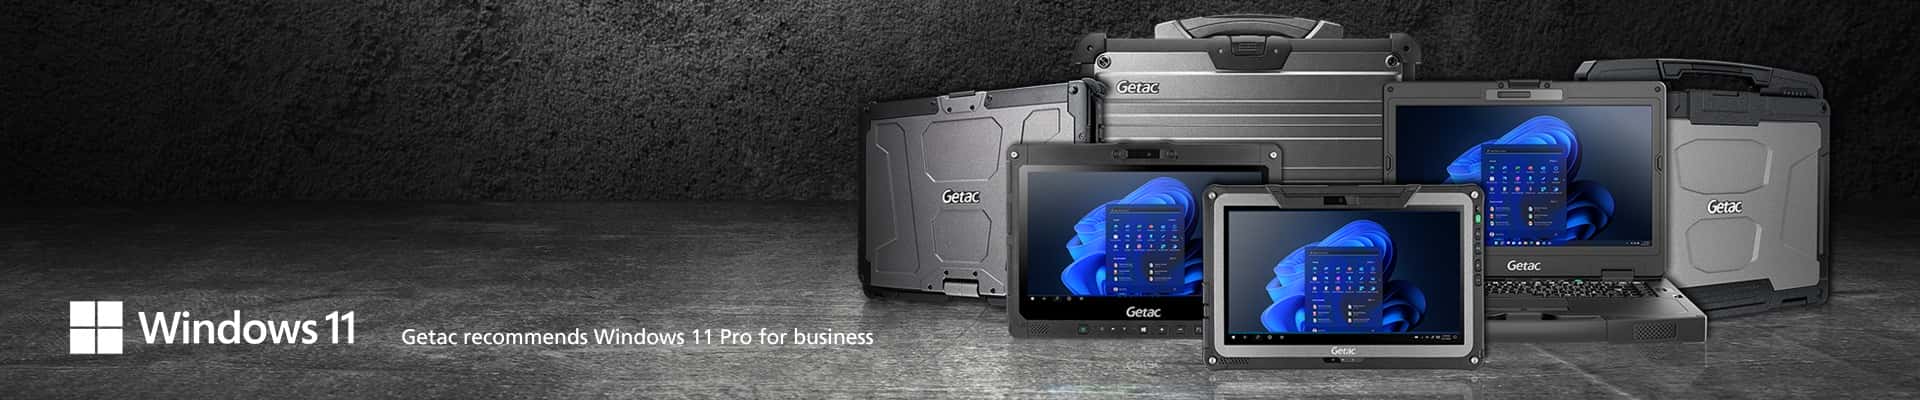 Win-11-family-without-Getac-logo